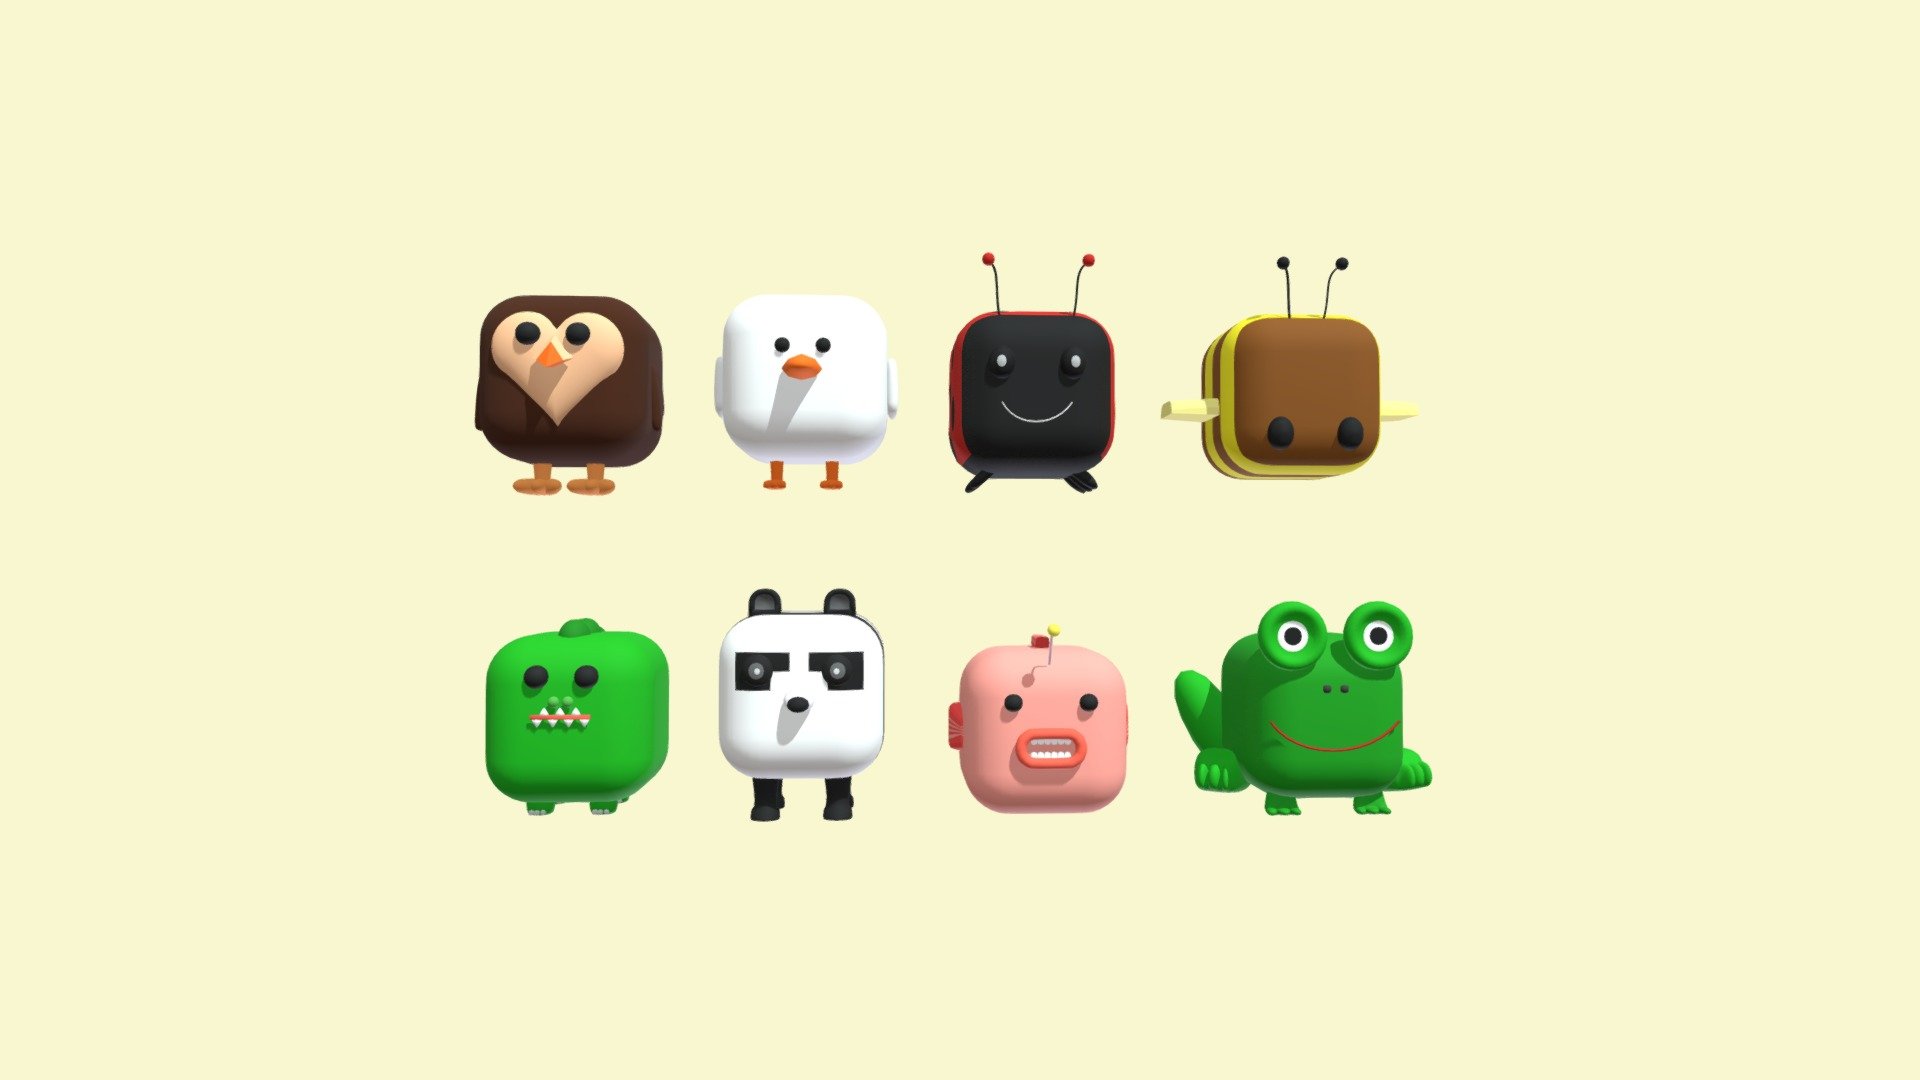 Hello! Cube Animals designed with Blender version 3.2.1. It can be used in games. From the left side; Owl, Seagull, Ladybug, Bee, Crocodile, Panda, Fish, Frog - Cube Animals - 3D model by ezgi bakim (@ezgibakim) 3d model